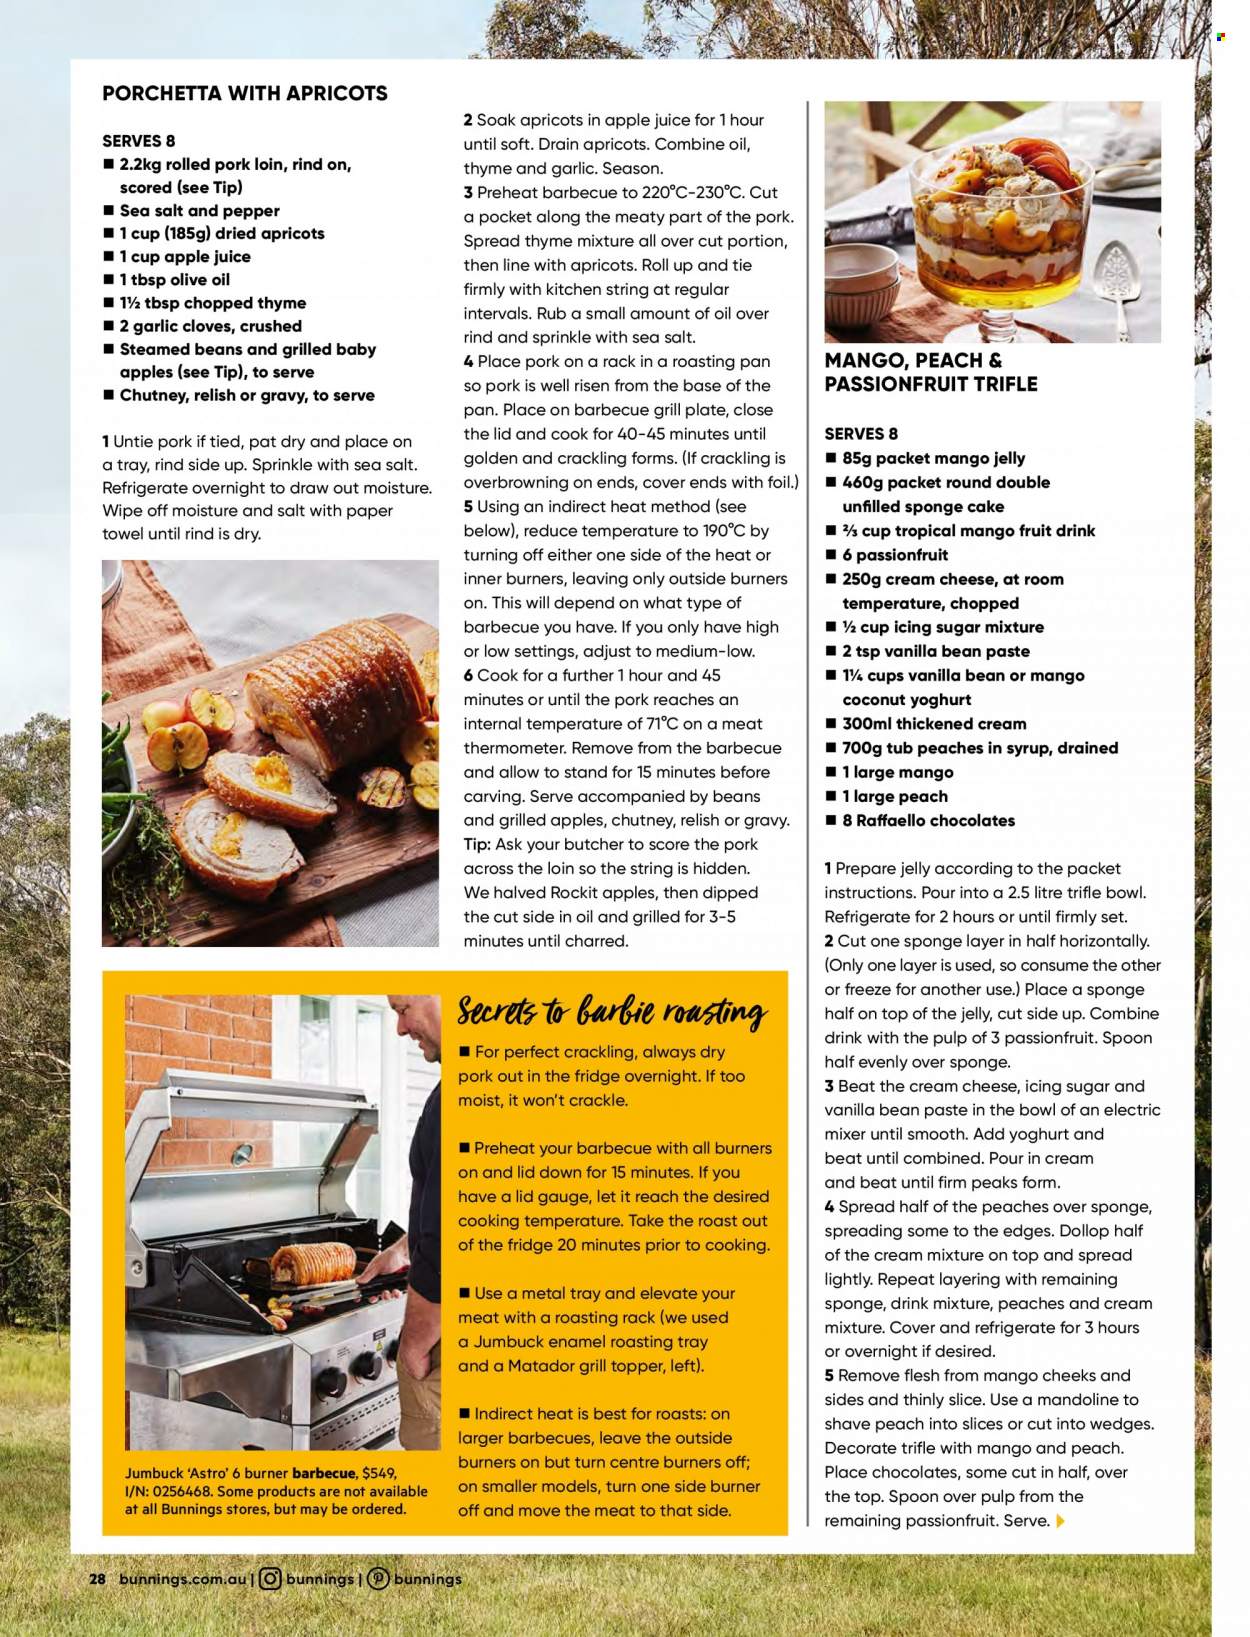 thumbnail - Bunnings Warehouse Catalogue - Sales products - Barbie, lid, spoon, thermometer, plate, pan, trifle bowl, meat thermometer, mixer, grill topper. Page 28.